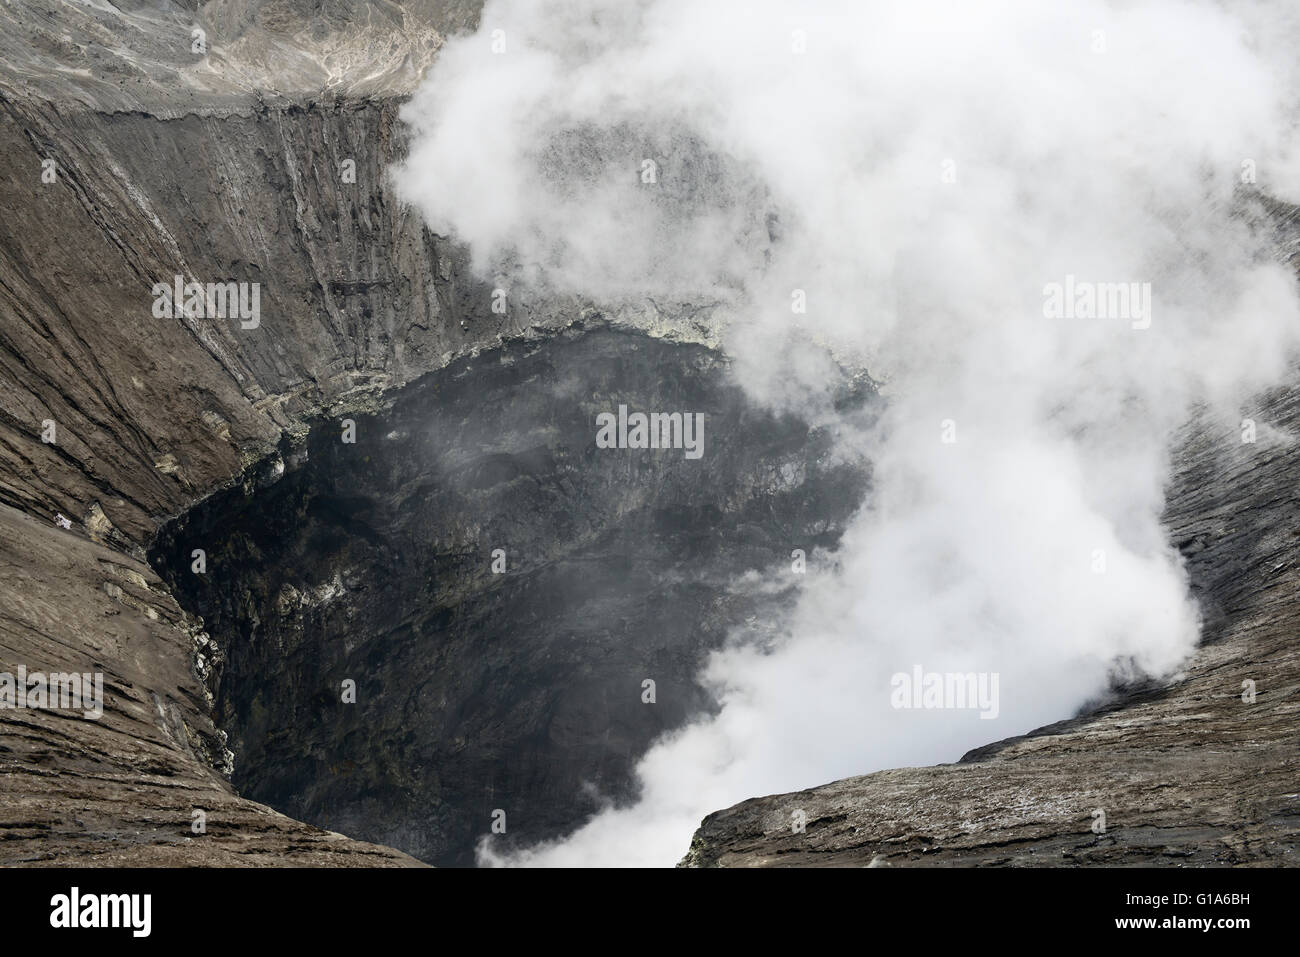 View inside the active volcano crater at Mt. Bromo, Tengger Semeru National Park, East Java, Indonesia. Stock Photo